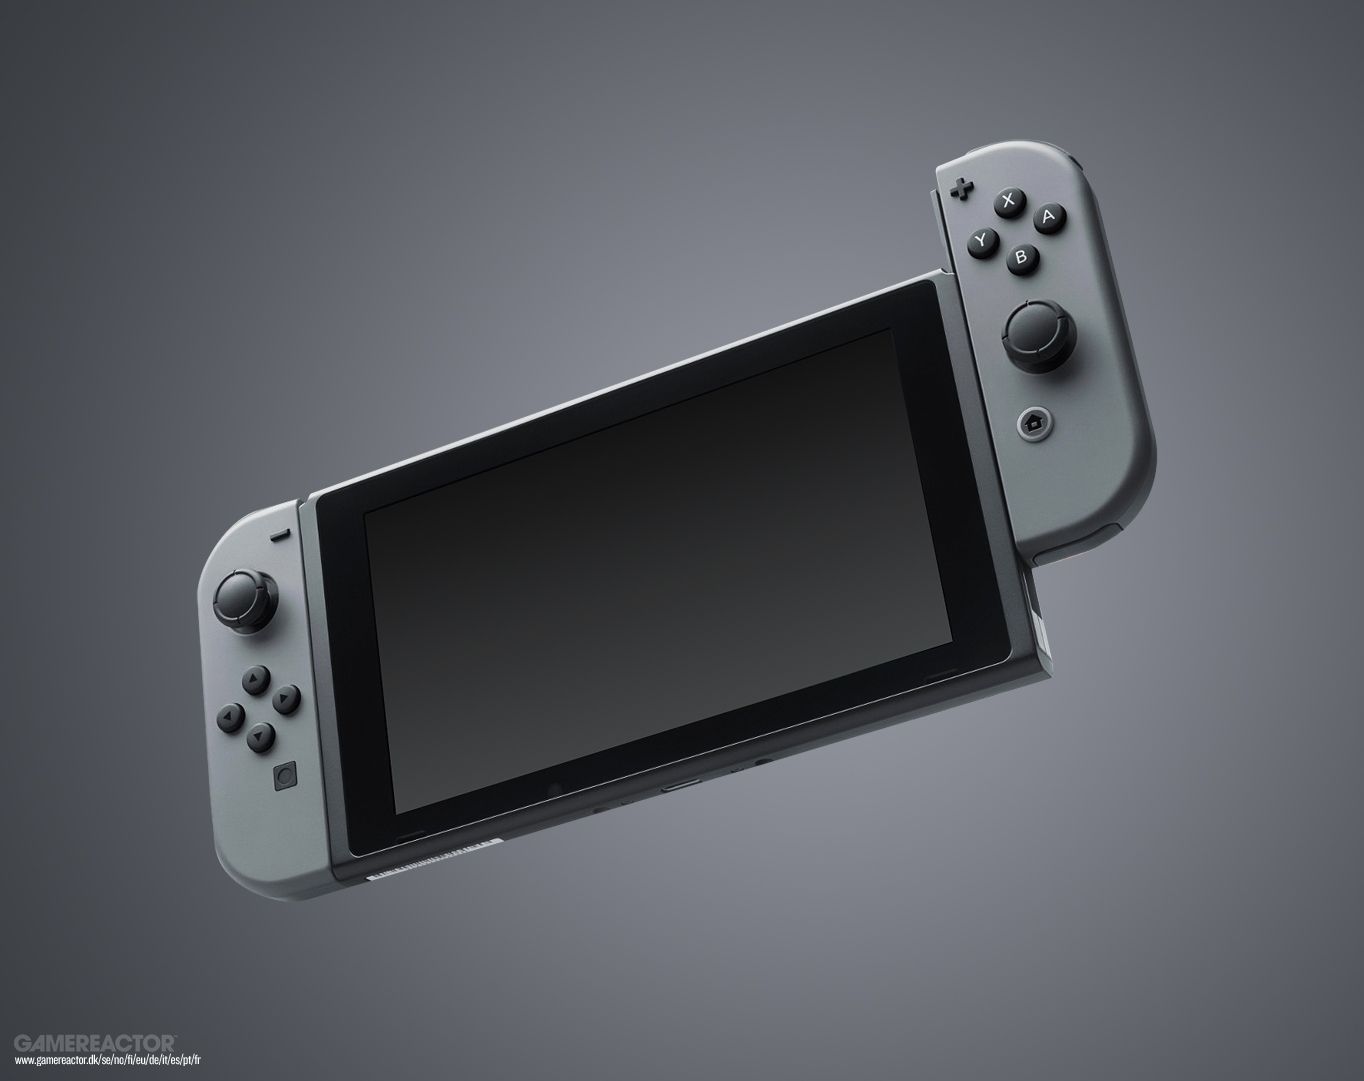 Nintendo expects “strong performance” from the Switch in the coming years